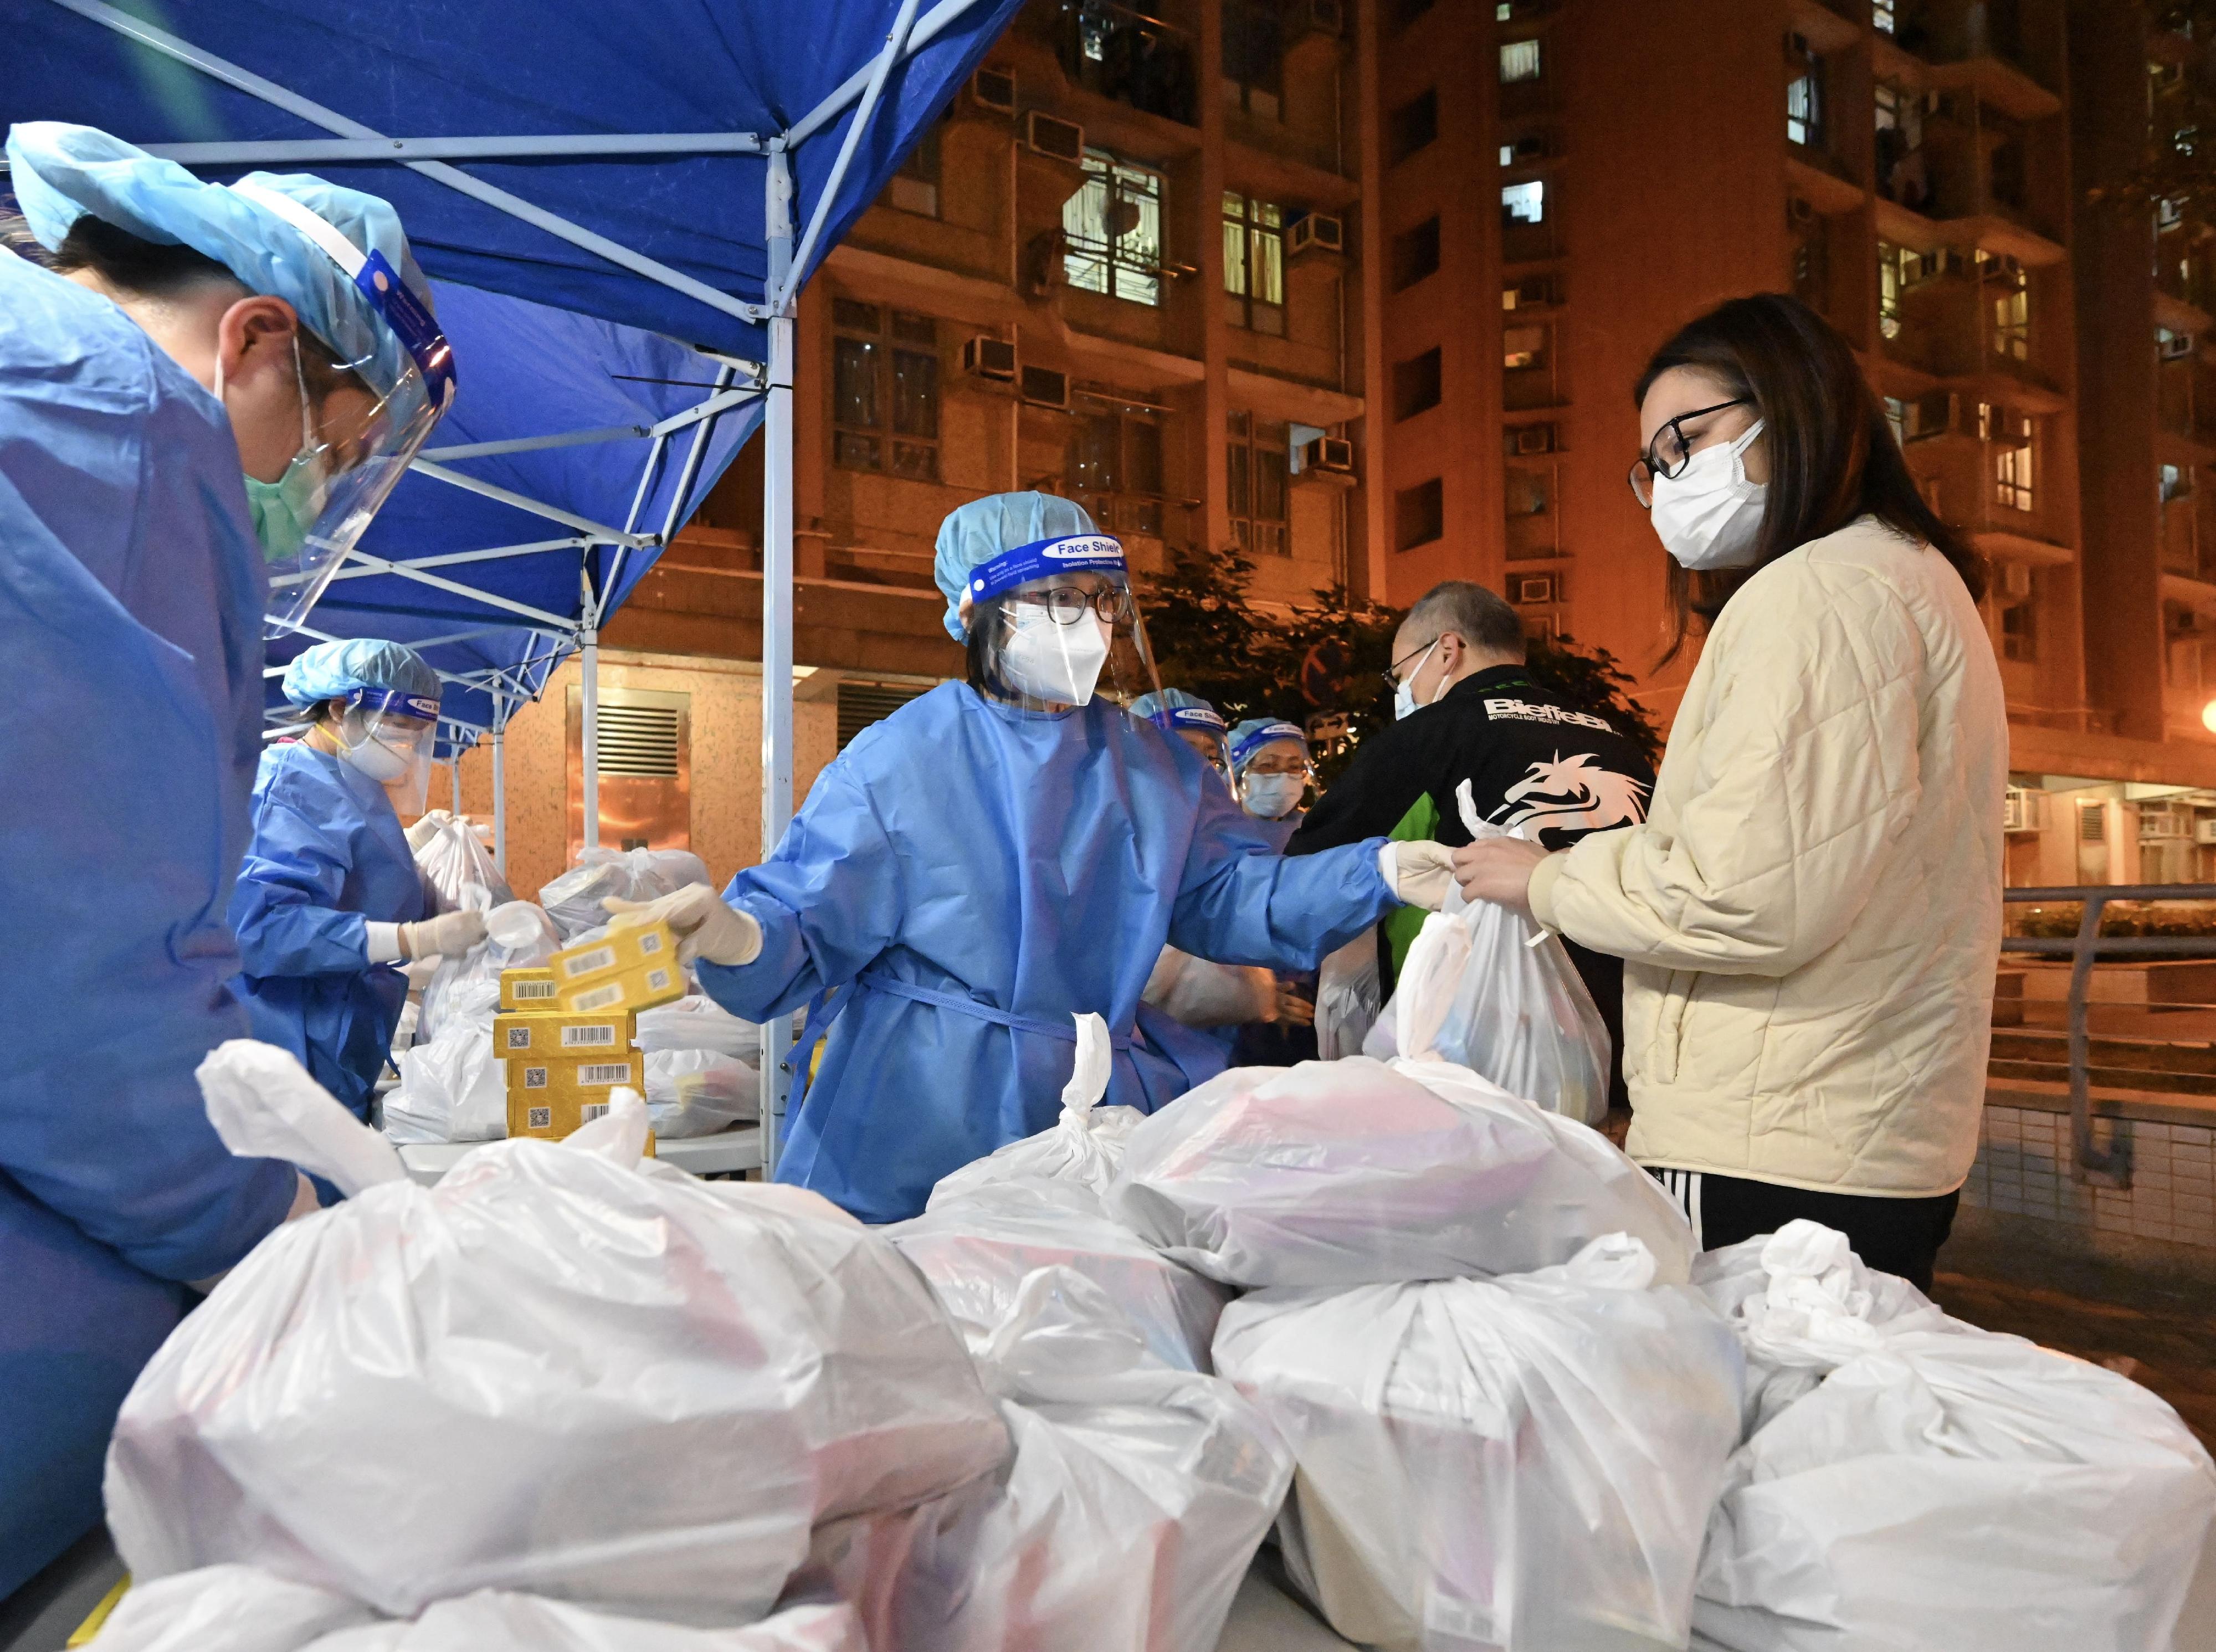 The Census and Statistics Department (C&SD) co-ordinated and conducted a "restriction-testing declaration" and compulsory testing notice operation in respect of a specified "restricted area" in Sau Yin House, Sau Mau Ping Estate, Kwun Tong, last night (February 28). Photo shows C&SD staff members delivering anti-epidemic supplies to residents.